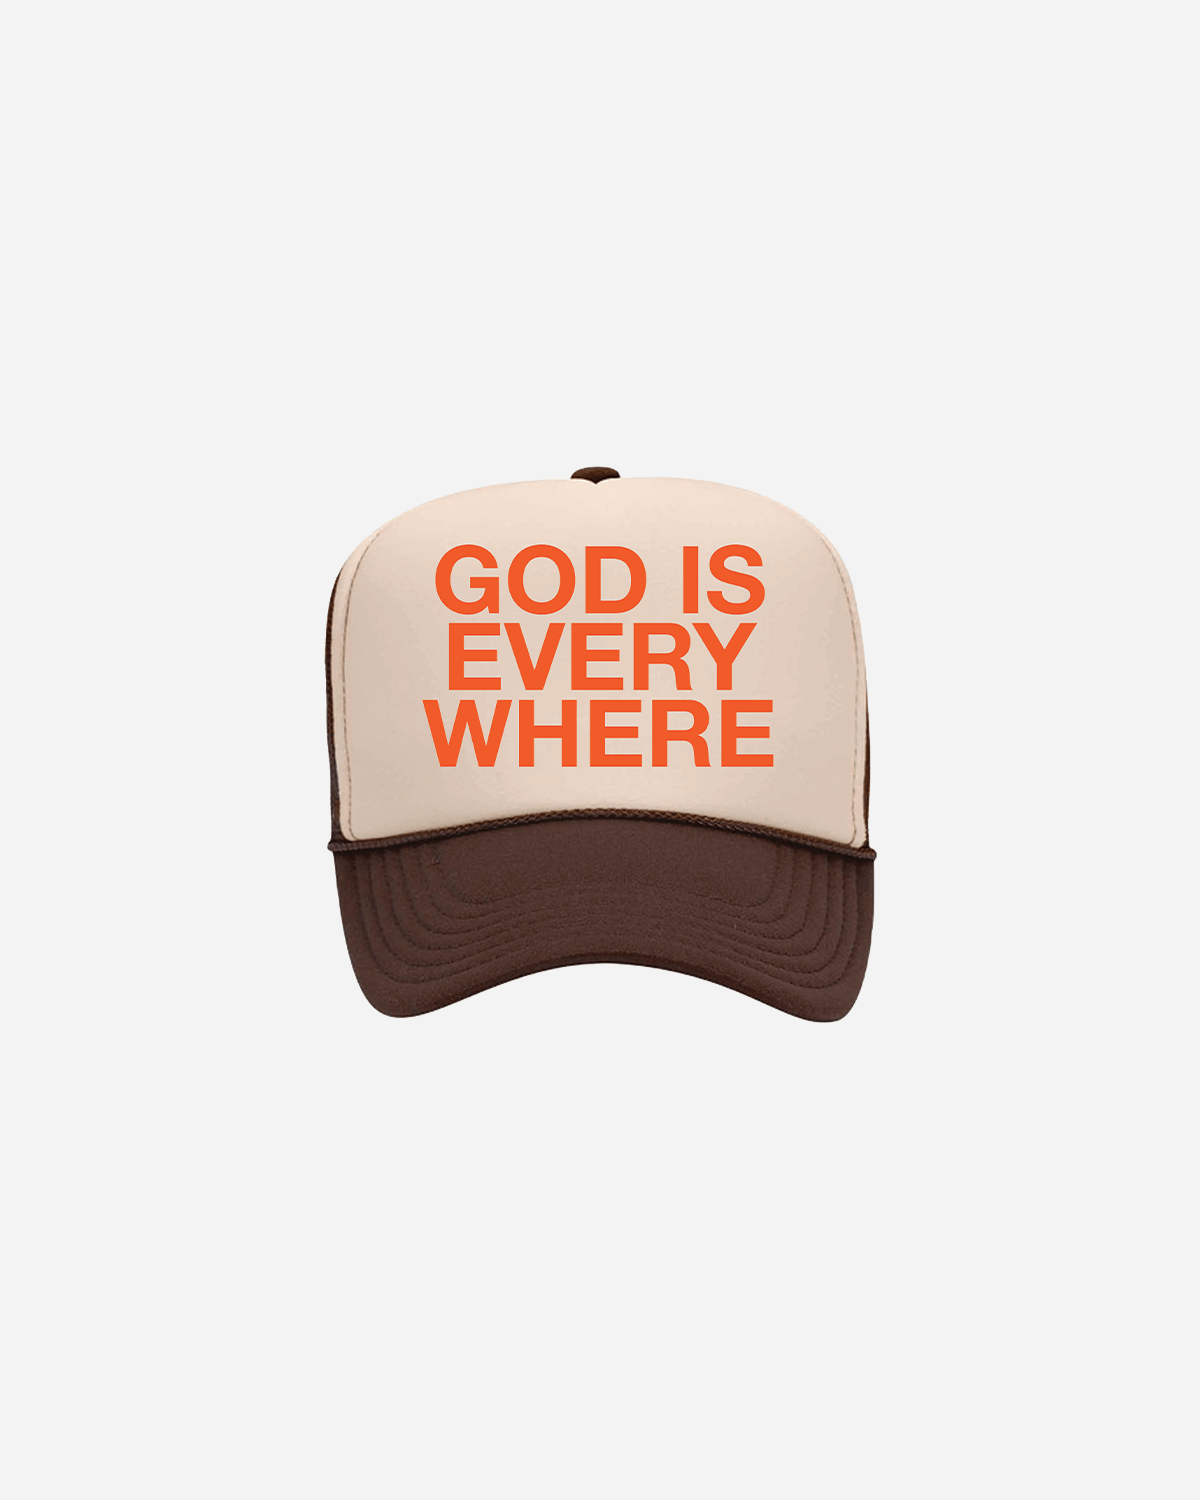 GOD IS EVERYWHERE Trucker hat brown and tan with orange writing. Christian hat by NHIM APPAREL